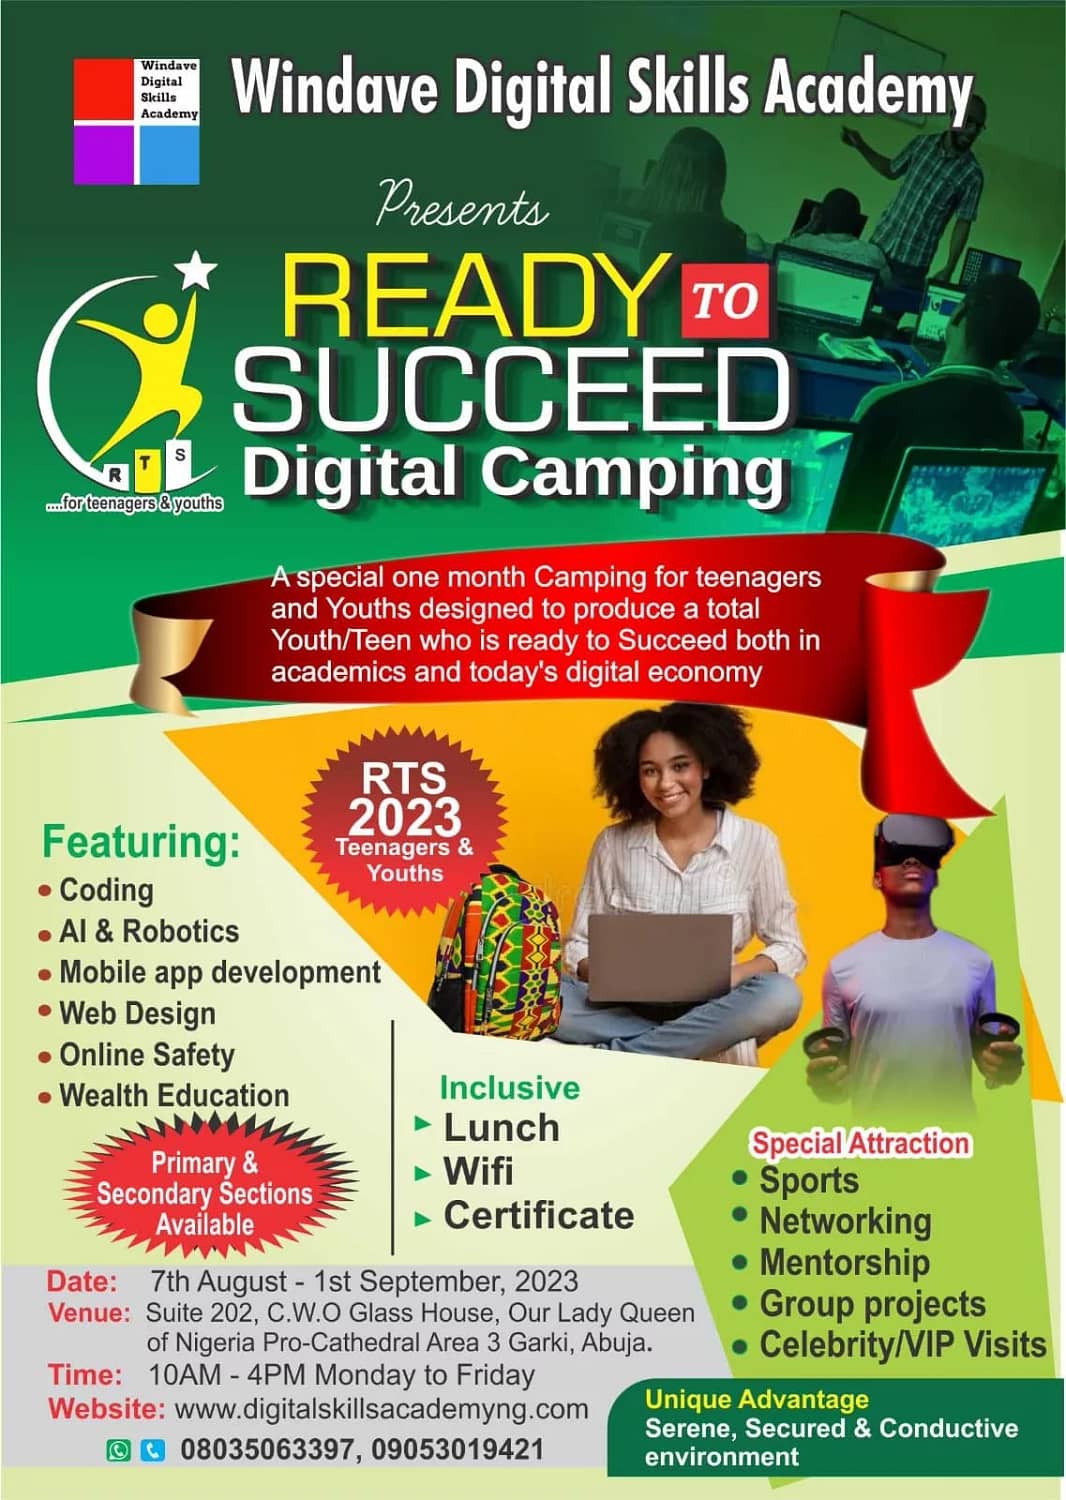 Ready to succeed digital camping